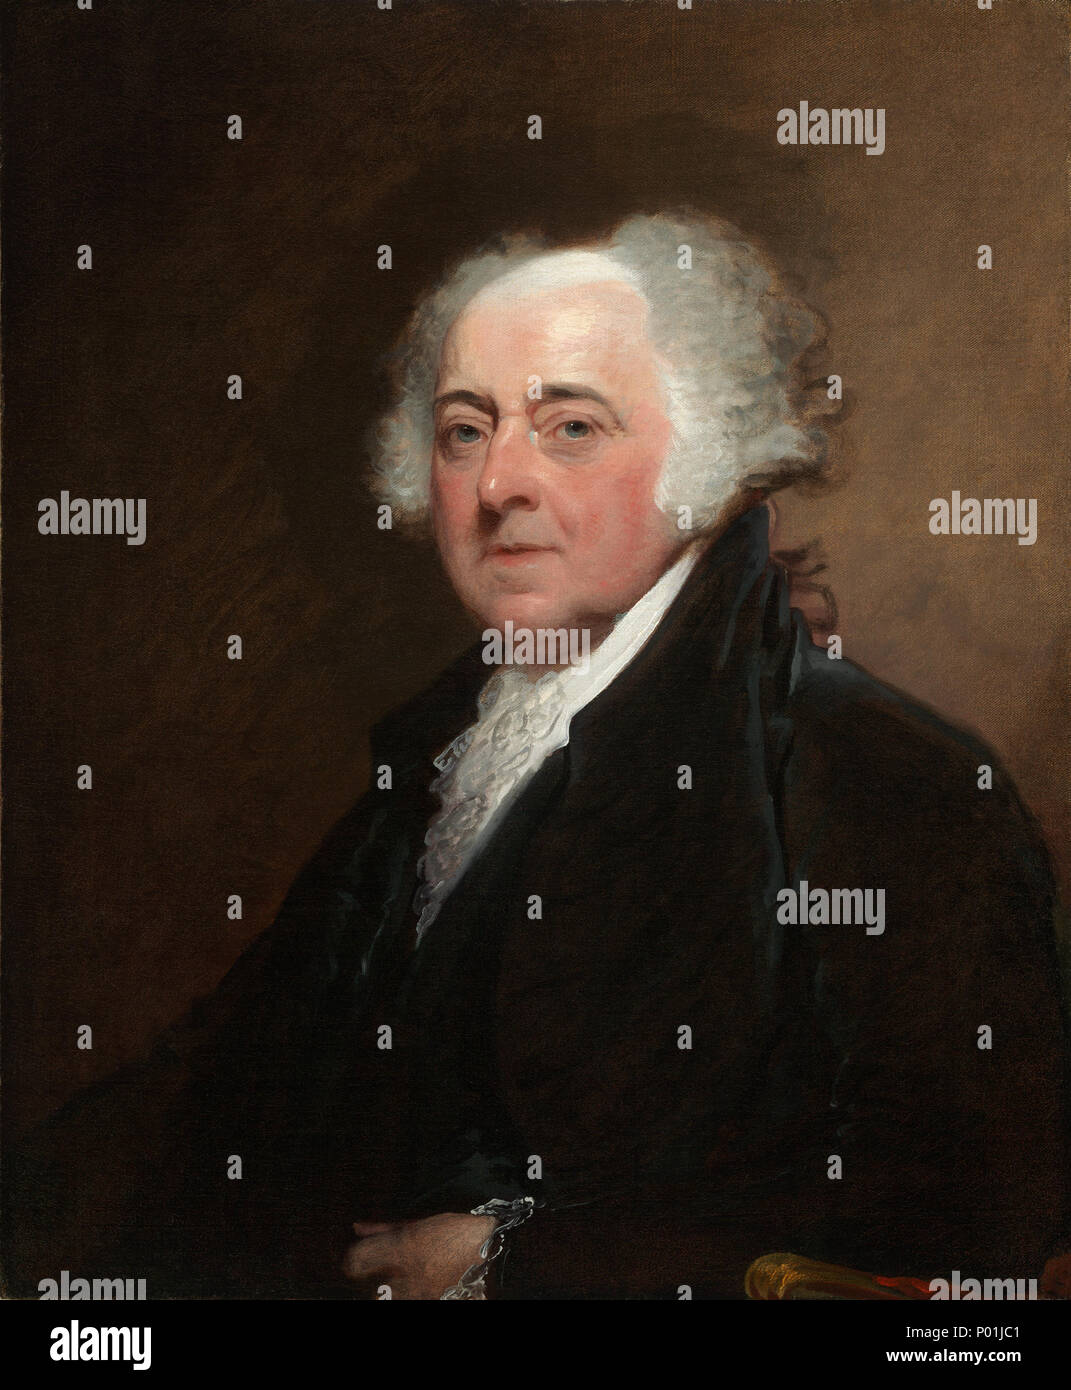 Painting; oil on canvas; overall: 73.7 x 61 cm (29 x 24 in.) framed: 97.5 x 84.5 x 10.8 cm (38 3/8 x 33 1/4 x 4 1/4 in.); 12 John Adams A18236 Stock Photo